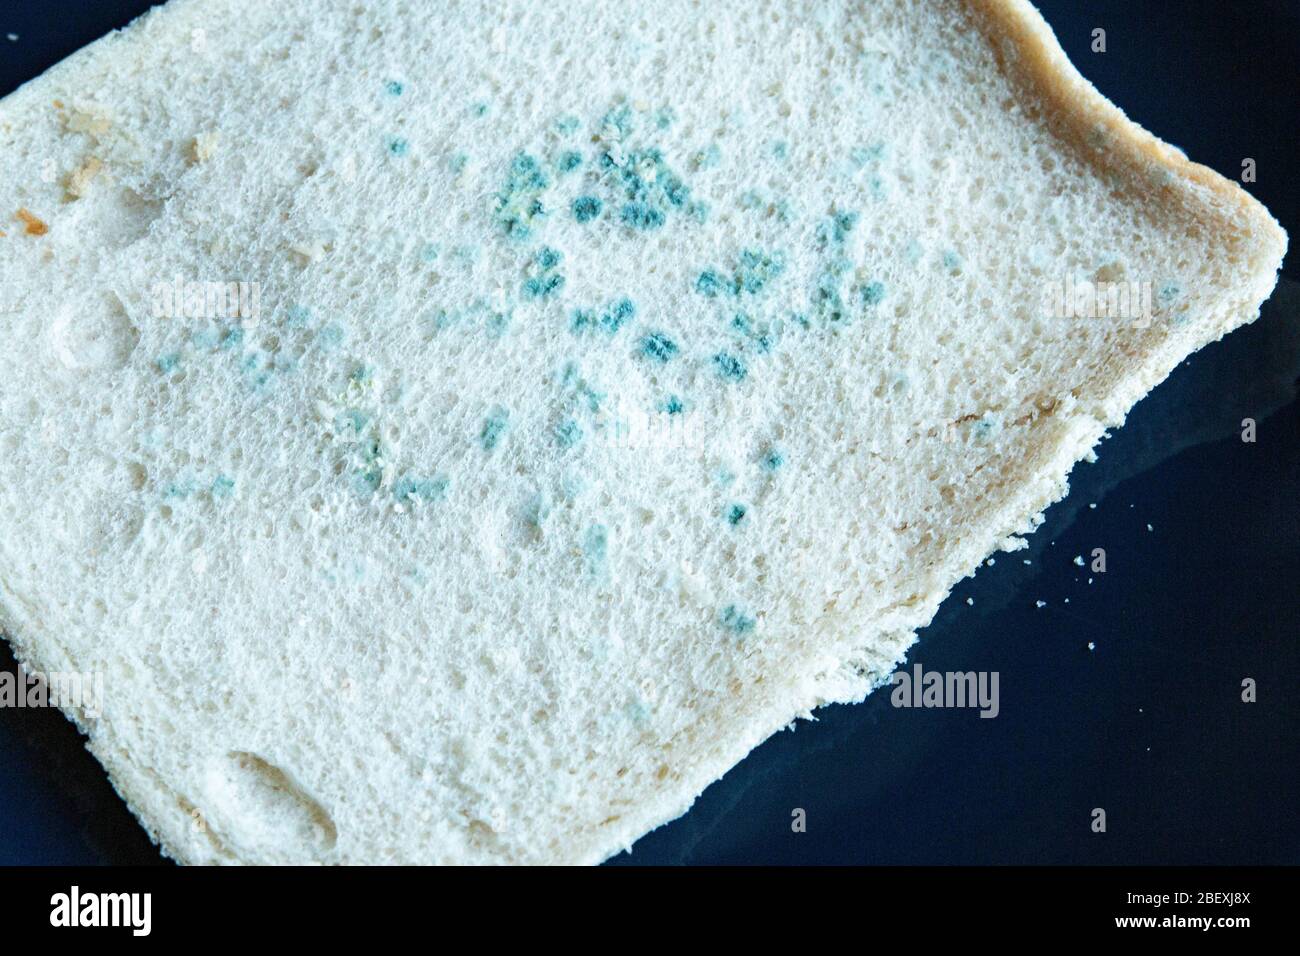 Slice of white bread with green mould growing on it. Stock Photo